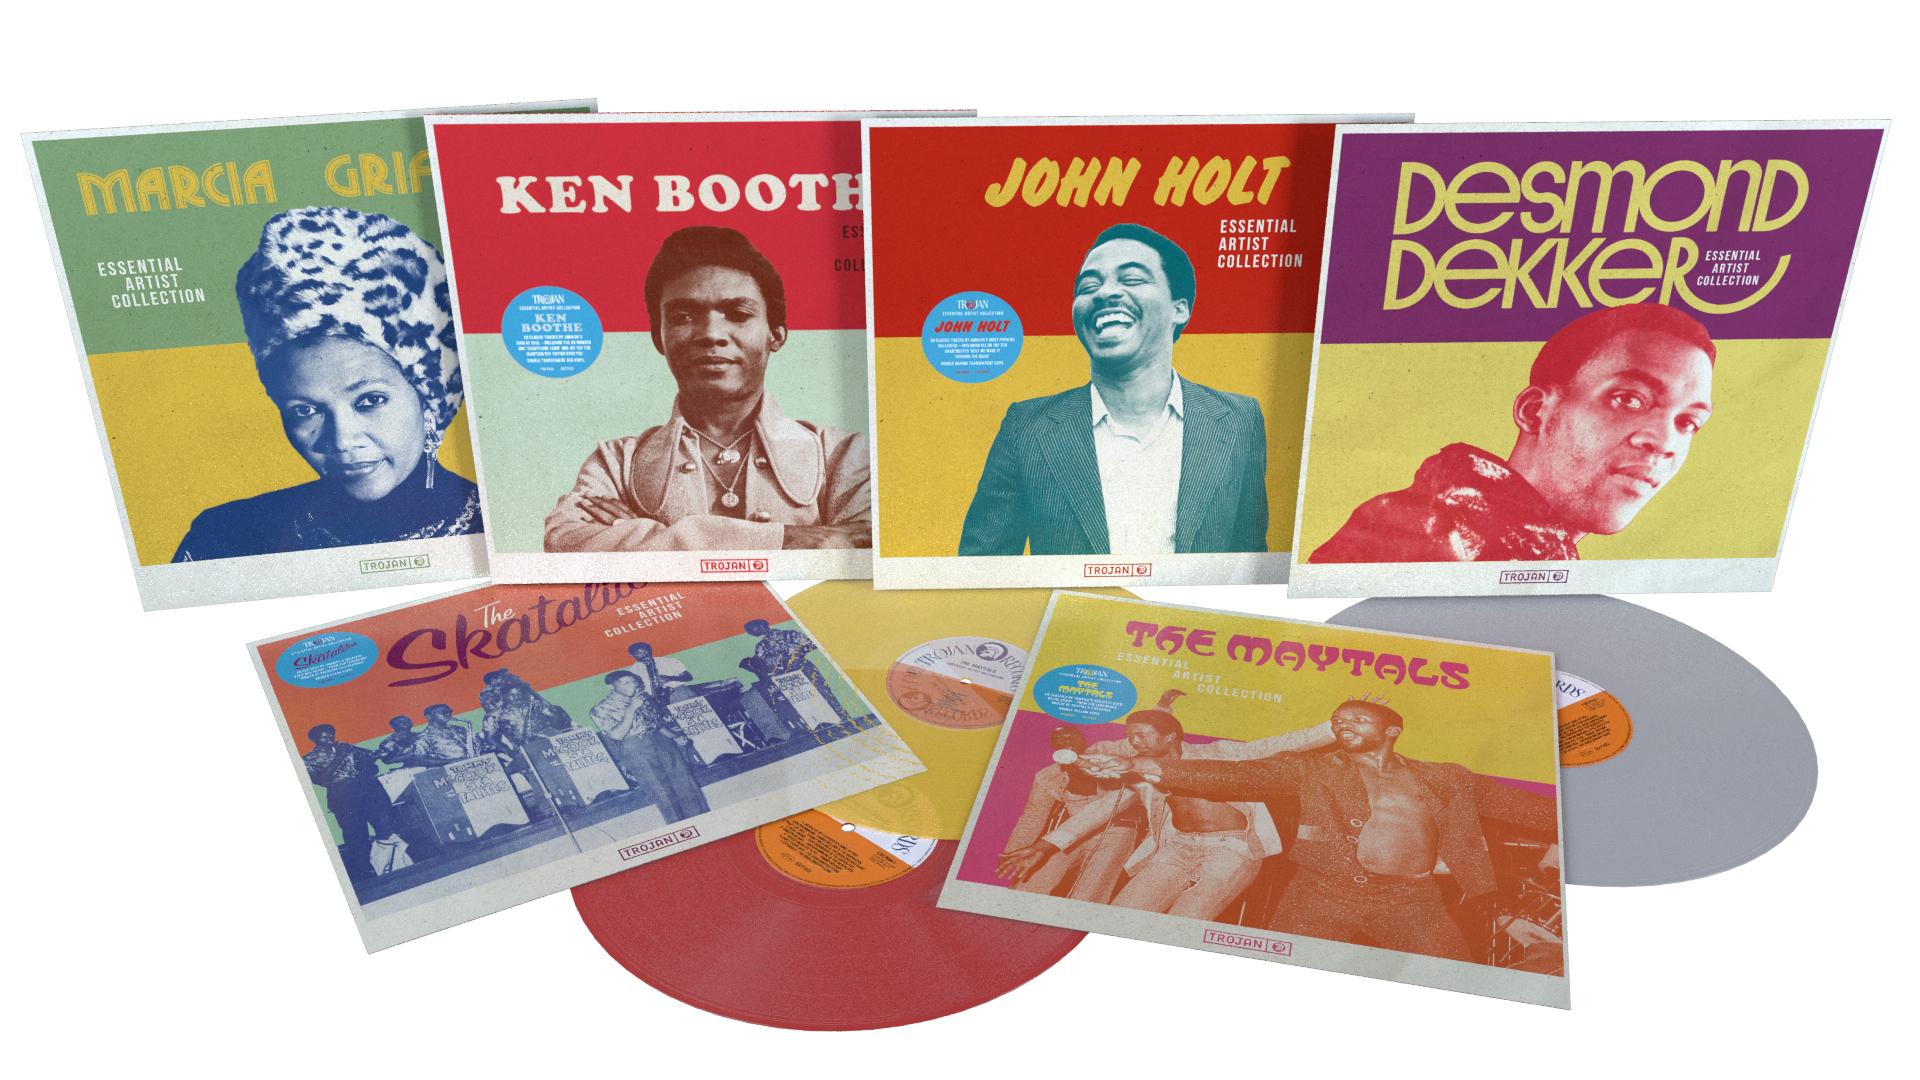 Trojan Records announce 4 new albums from ‘The Essential Artist Collection’